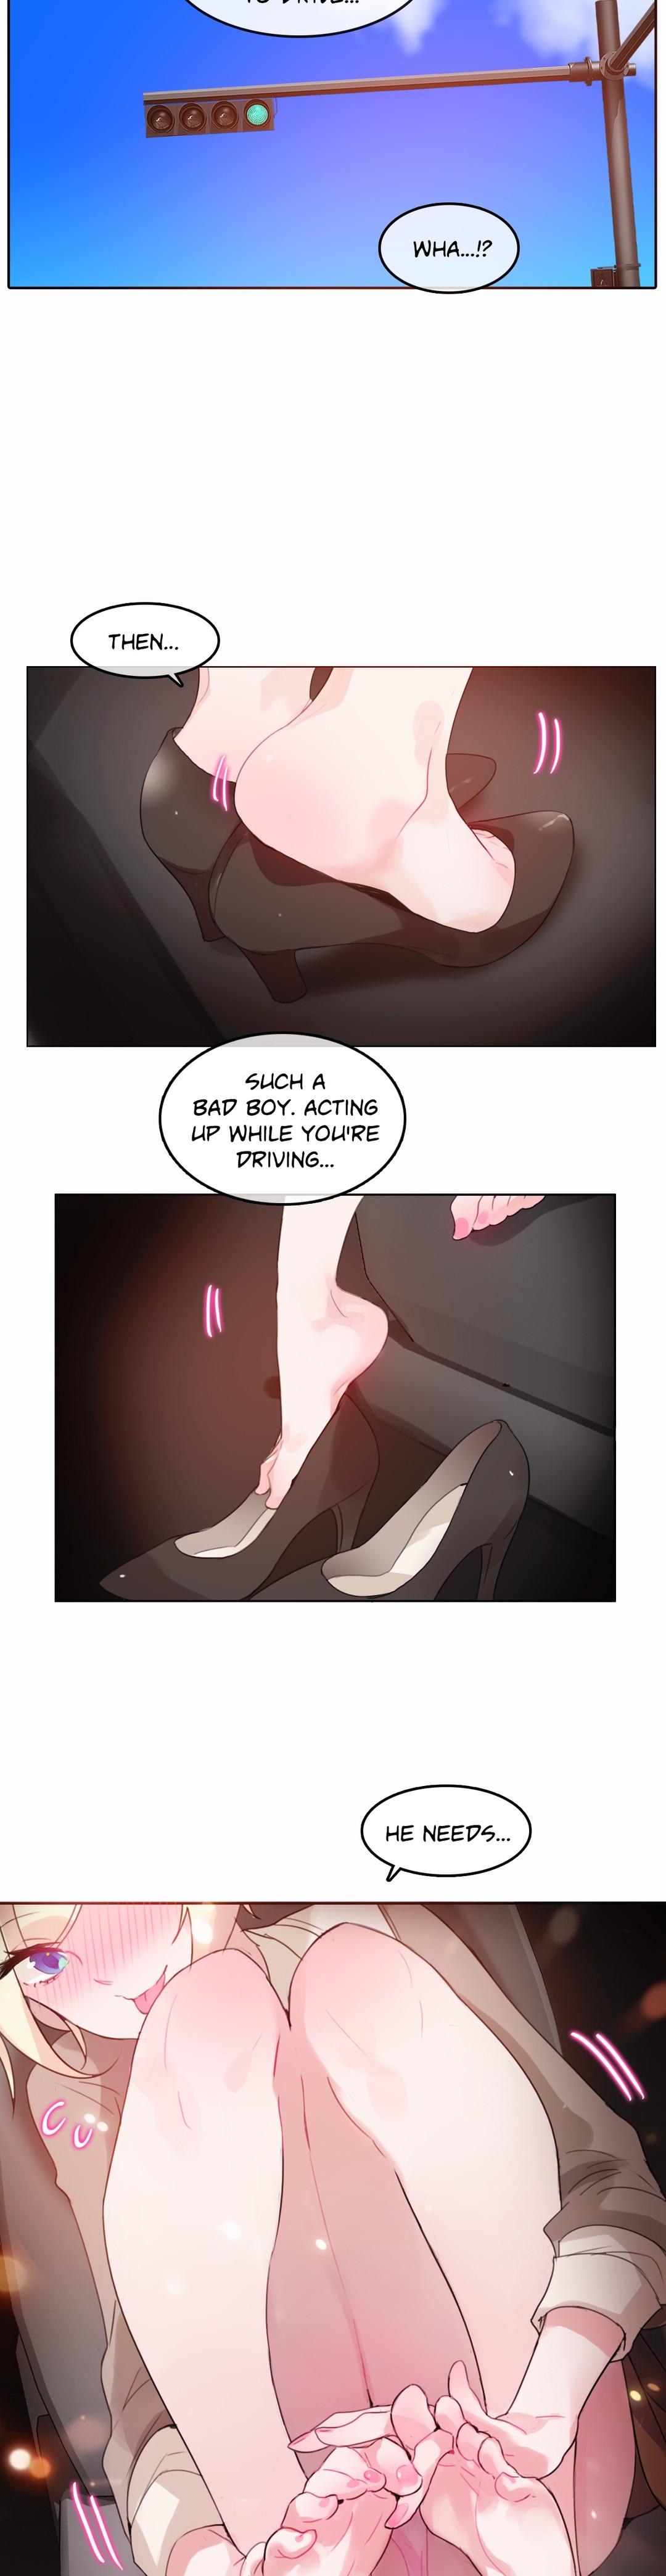 A Pervert's Daily Life Ch. 1-34 394